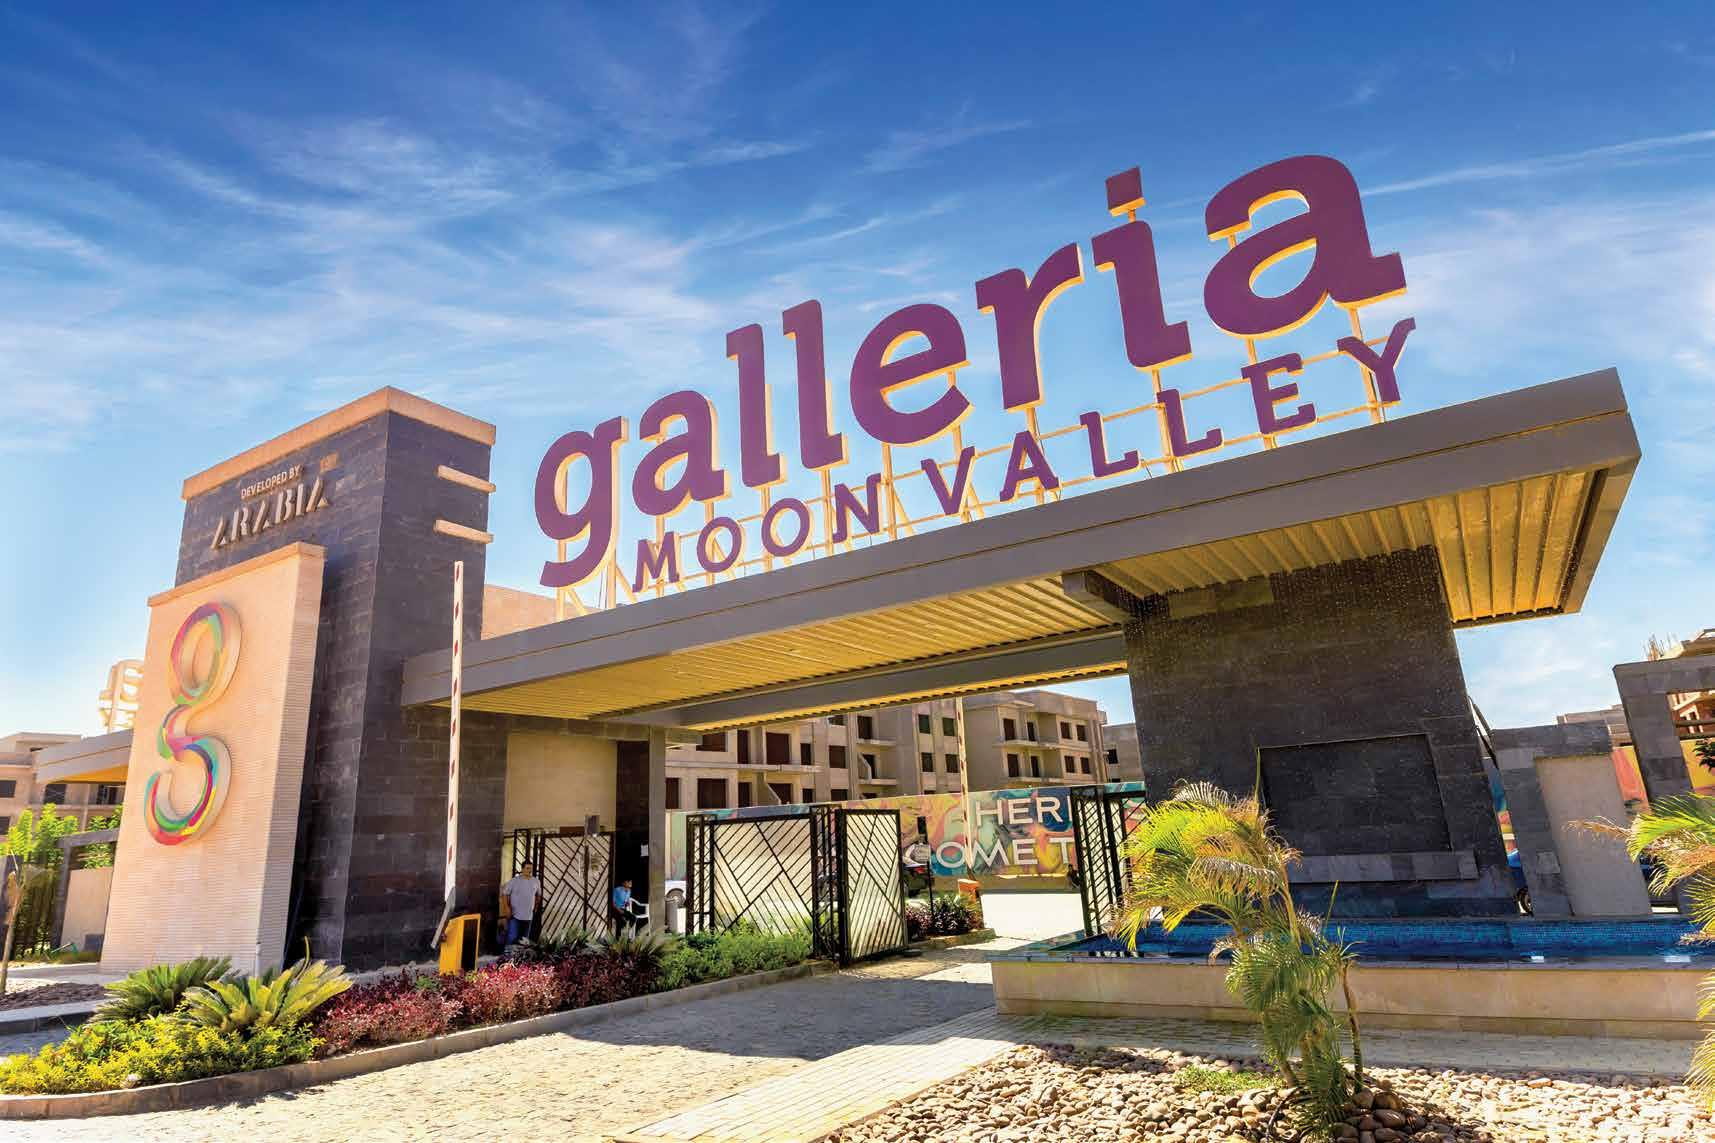 In installments over a period of up to 6 years, buy an apartment in Galleria Moon Valley project with an area of ​​200 meters